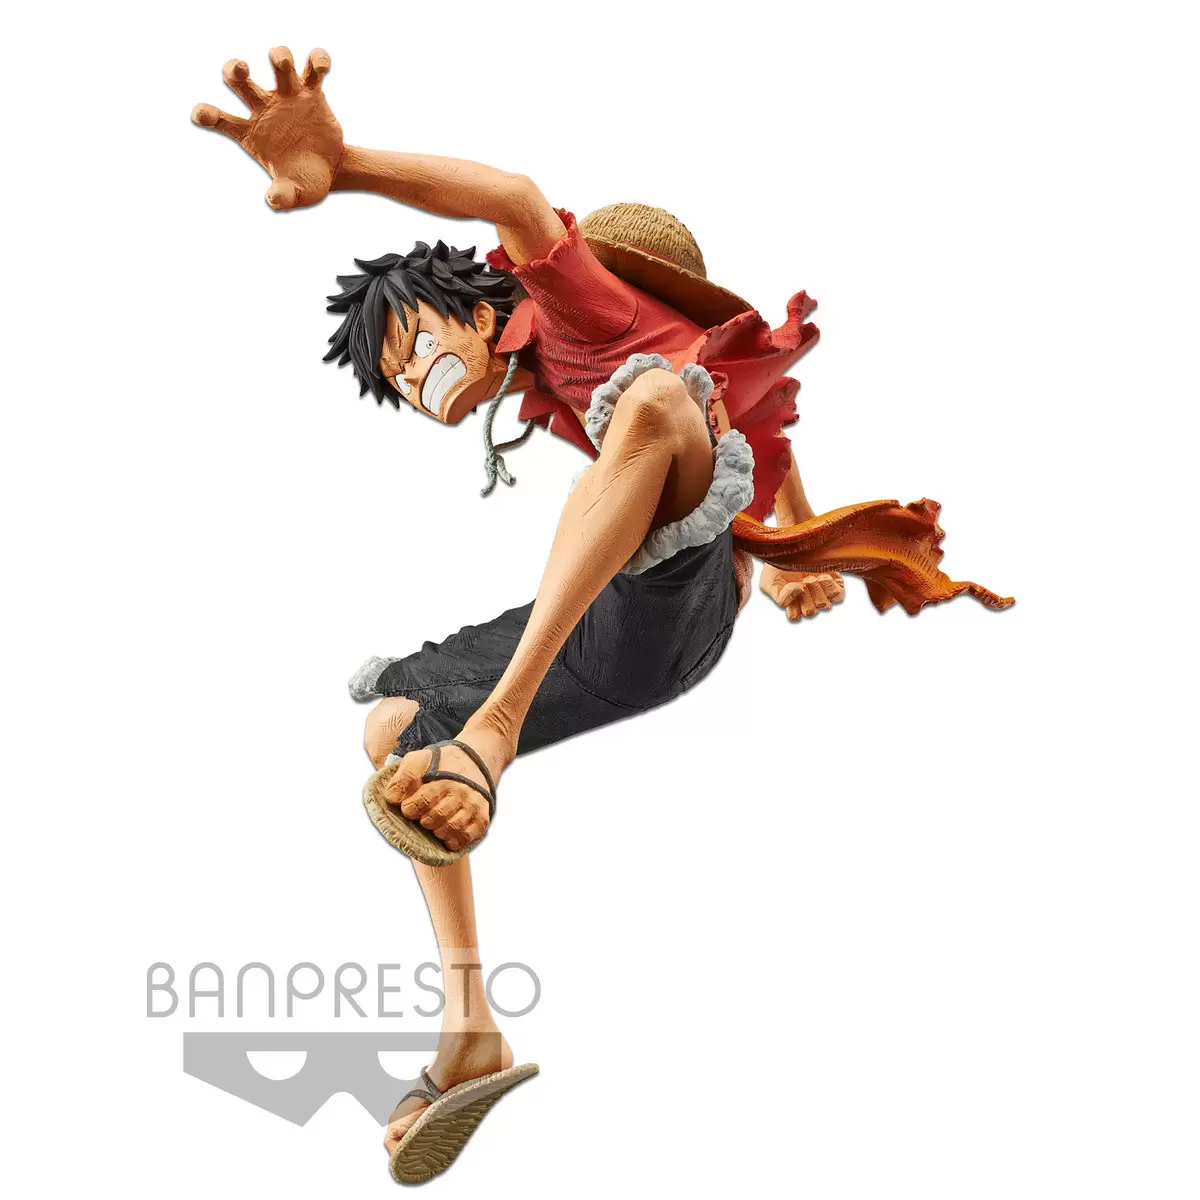 One Piece Monkey D. Luffy Figure - Chronicle King Of Artist